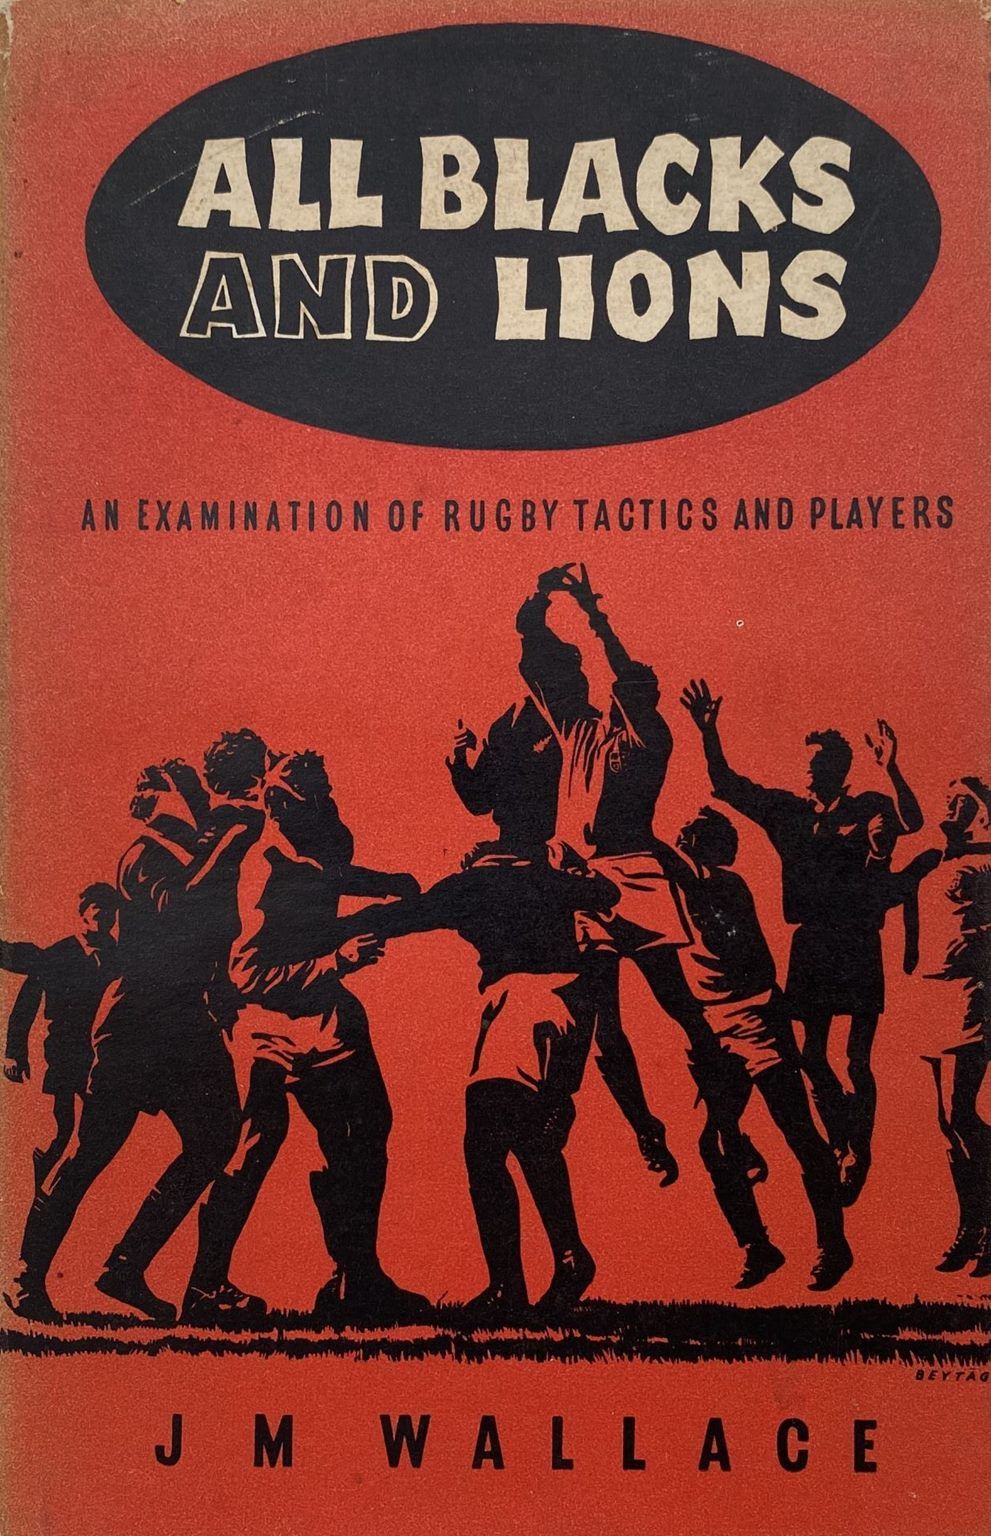 ALL BLACKS and LIONS: An Examination of Rugby Tactics and Players